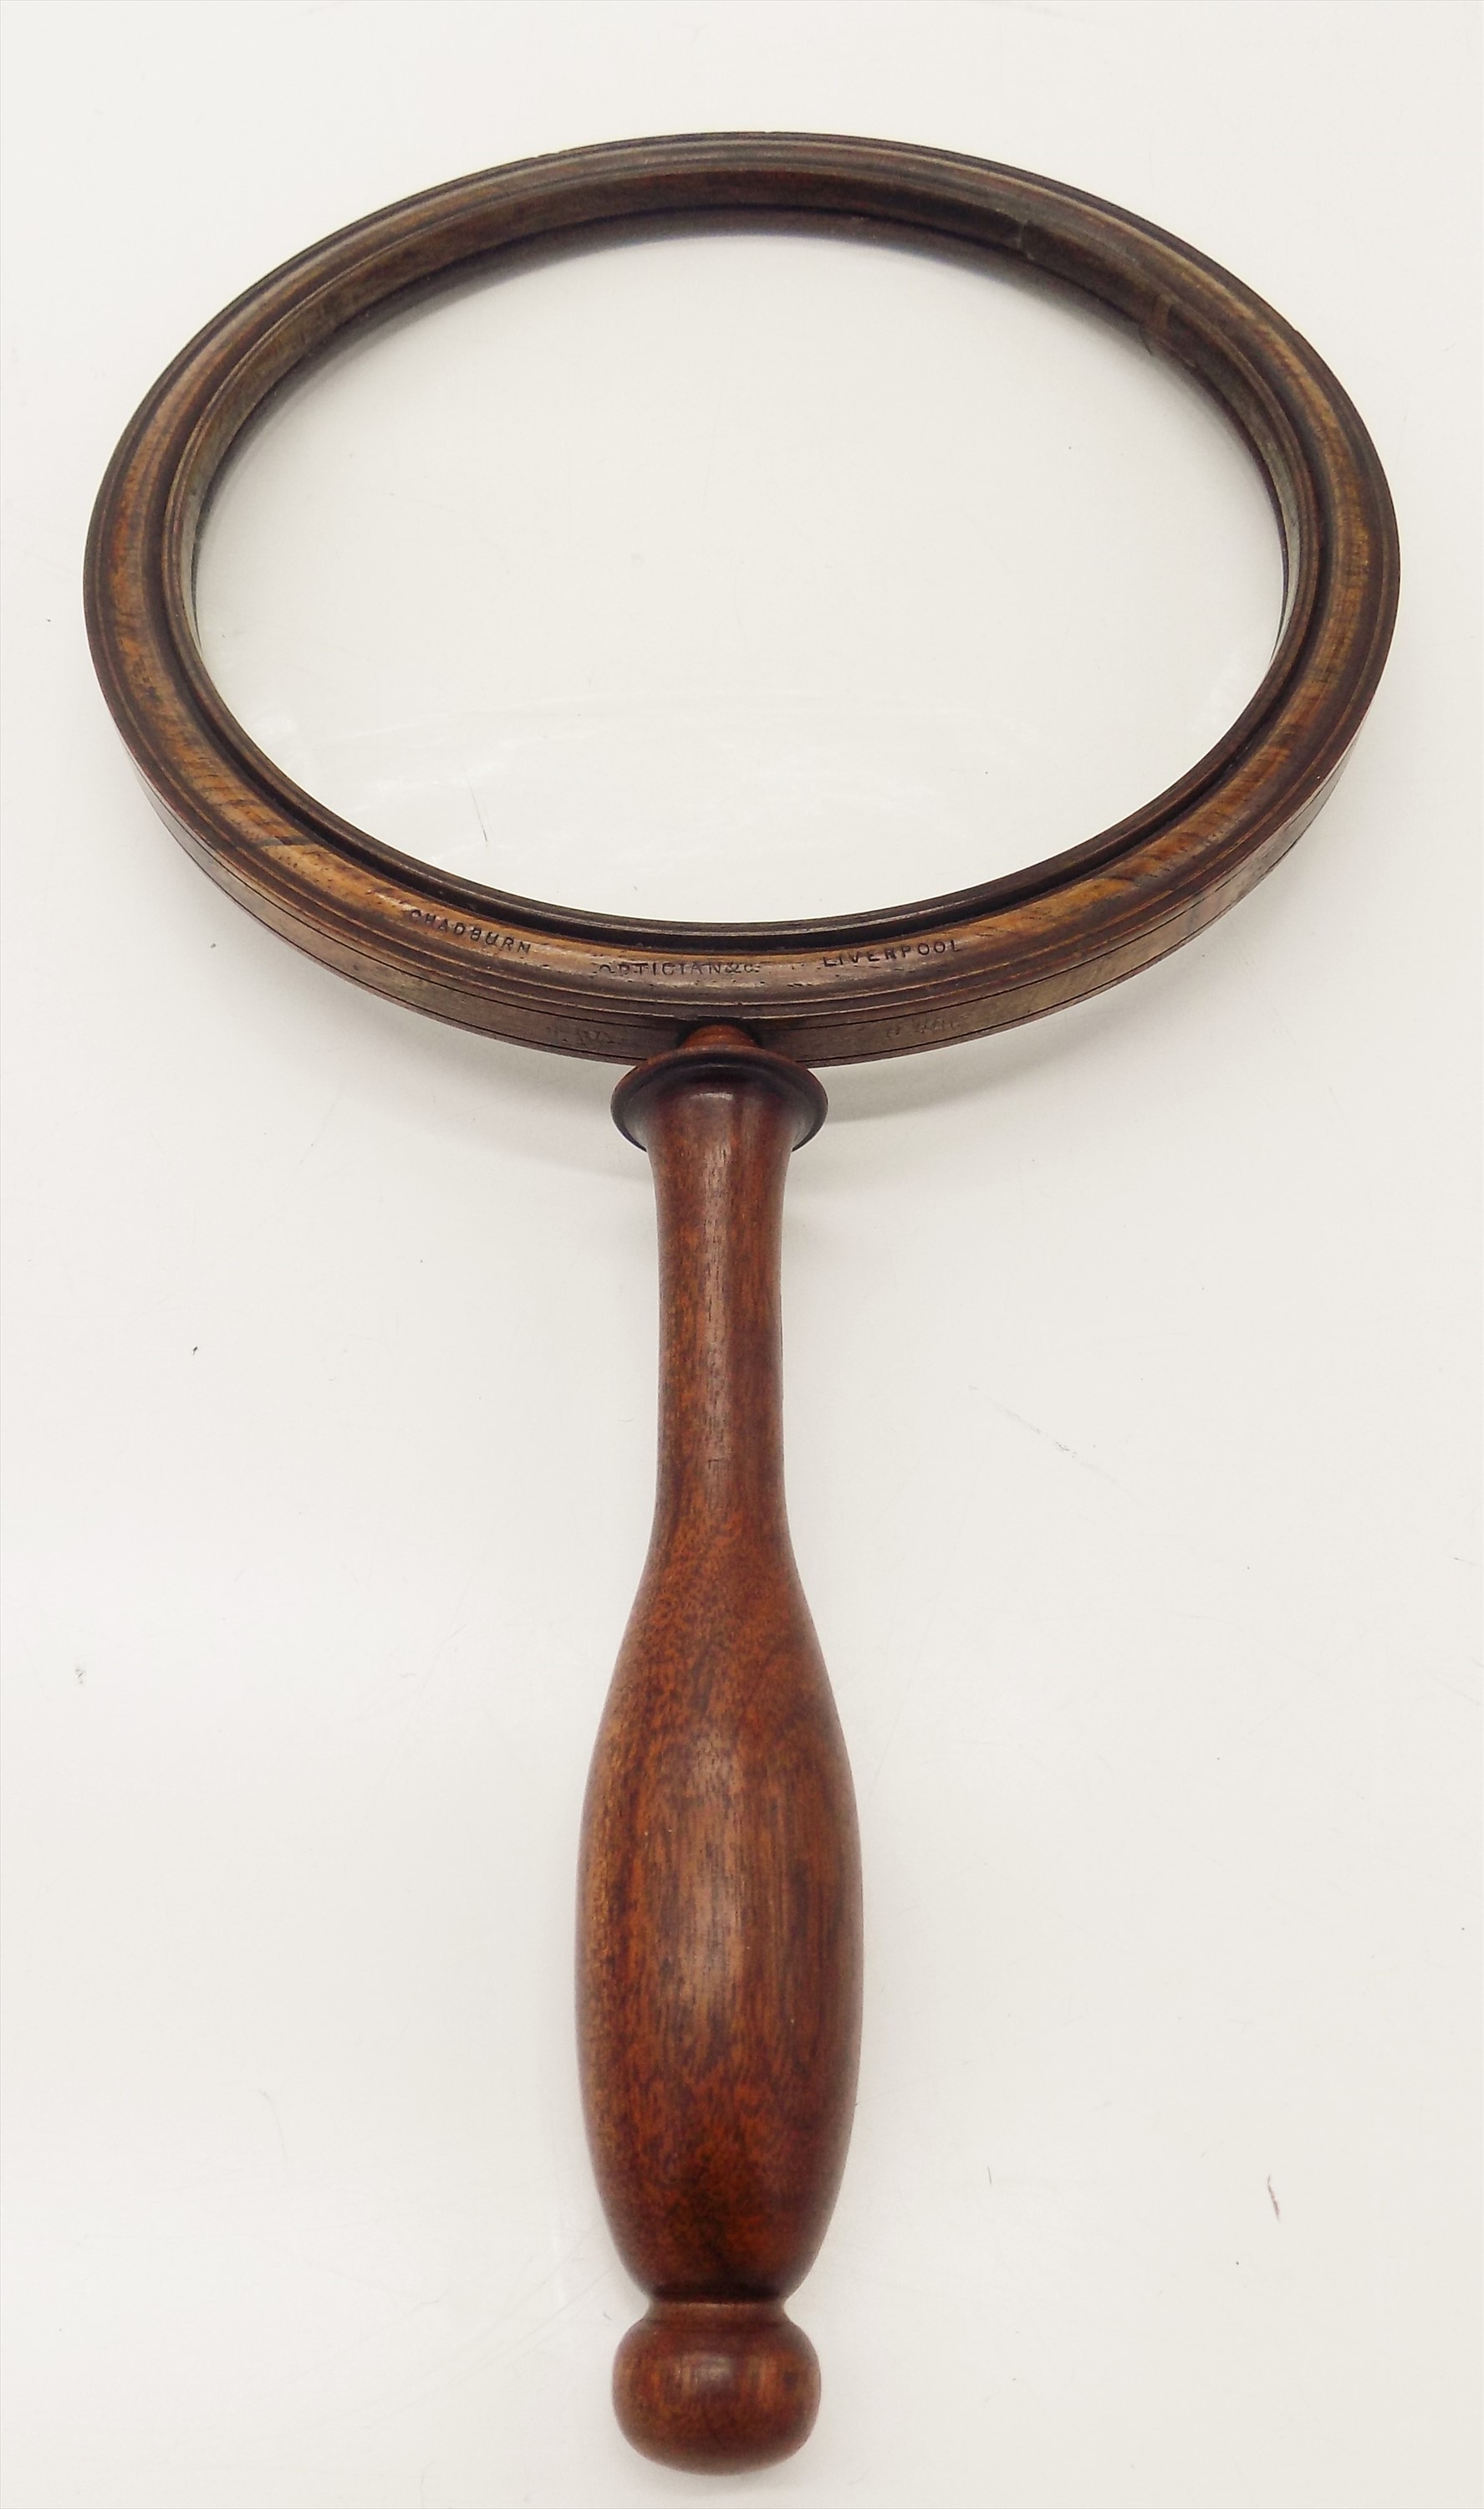 A rosewood gallery glass, signed Chadburn Optician, Liverpool. (Dimensions: Height 43.5cm